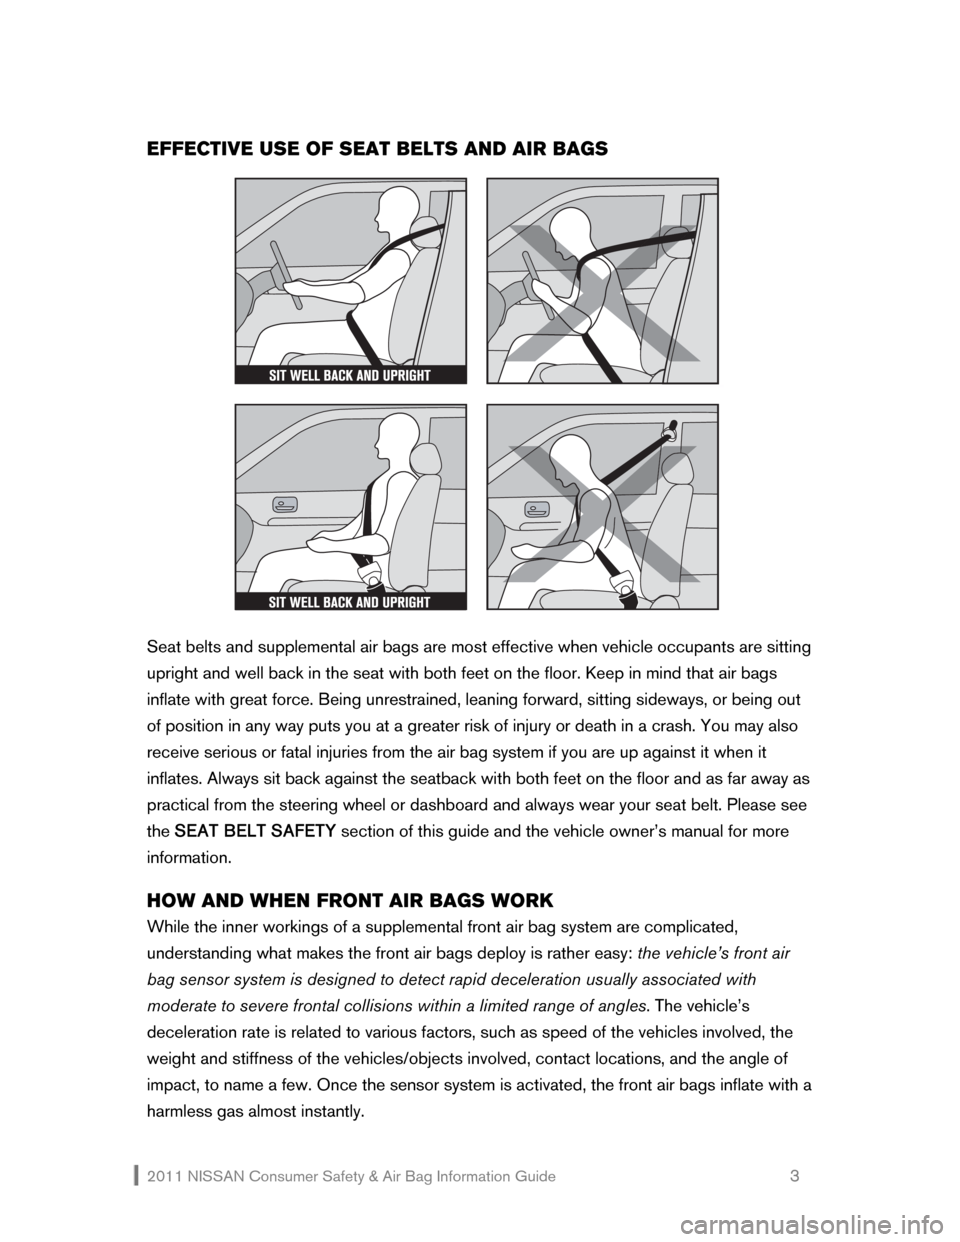 NISSAN XTERRA 2011 N50 / 2.G Consumer Safety Air Bag Information Guide 2011 NISSAN Consumer Safety & Air Bag Information Guide                                                       3 
EFFECTIVE USE OF SEAT BELTS AND AIR BAGS 
 
 
 
Seat belts and supplemental air bags ar